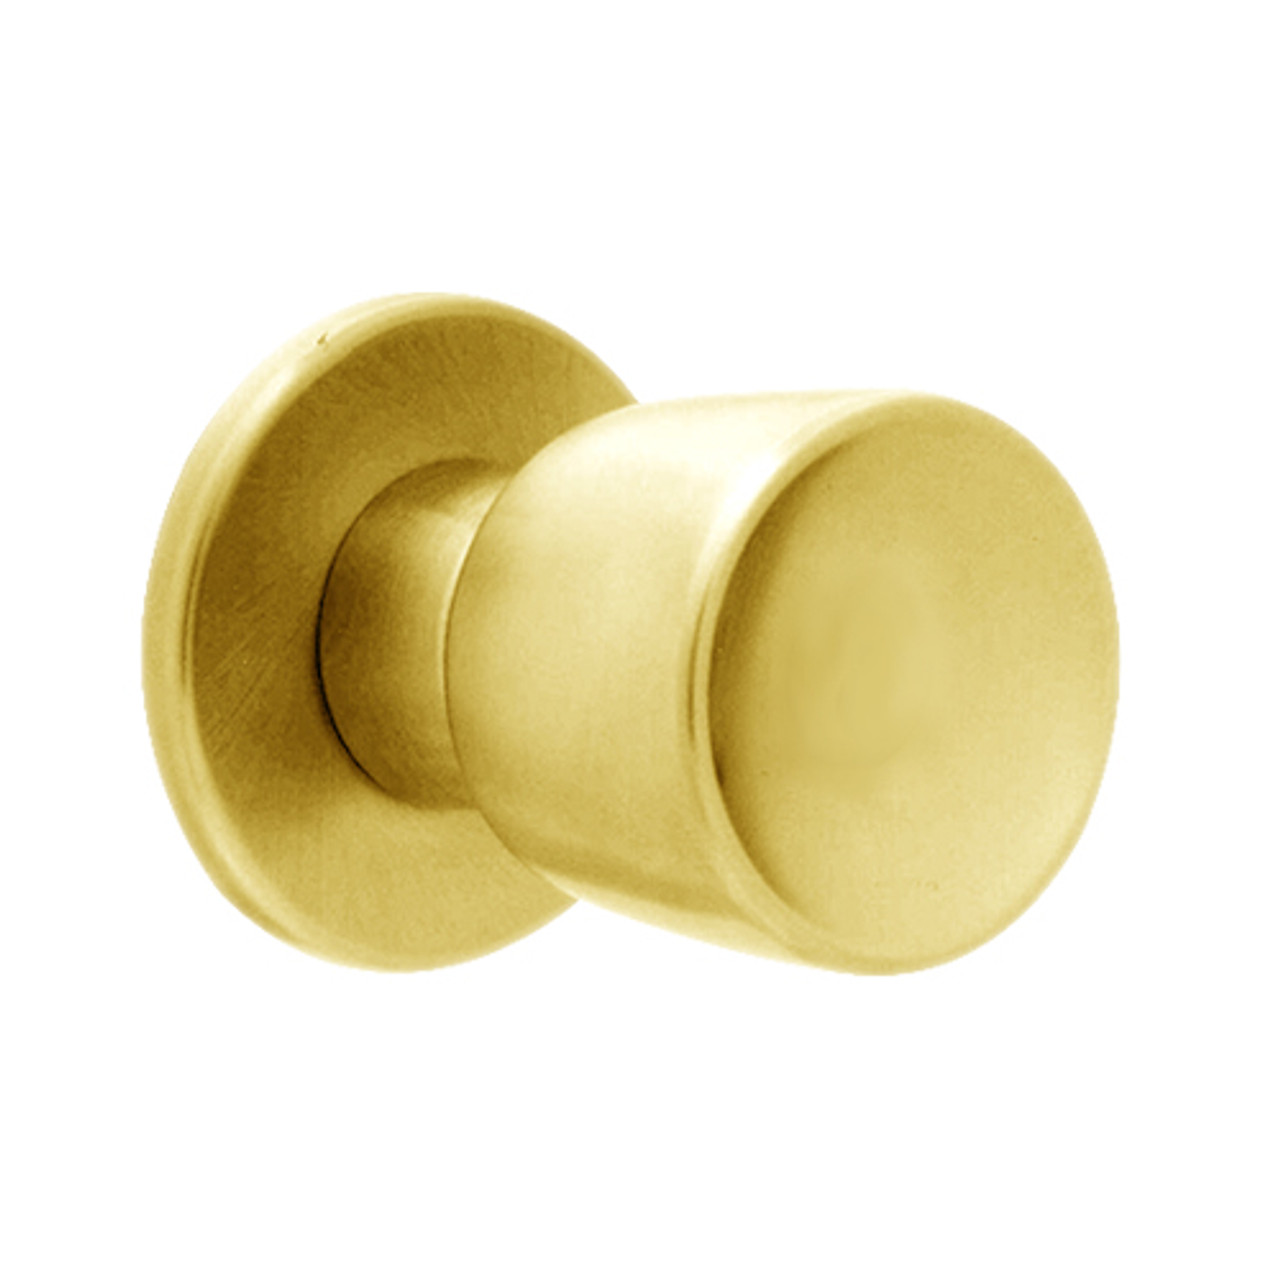 X101S-EG-605 Falcon X Series Cylindrical Passage Lock with Elite-Gala Knob Style in Bright Brass Finish